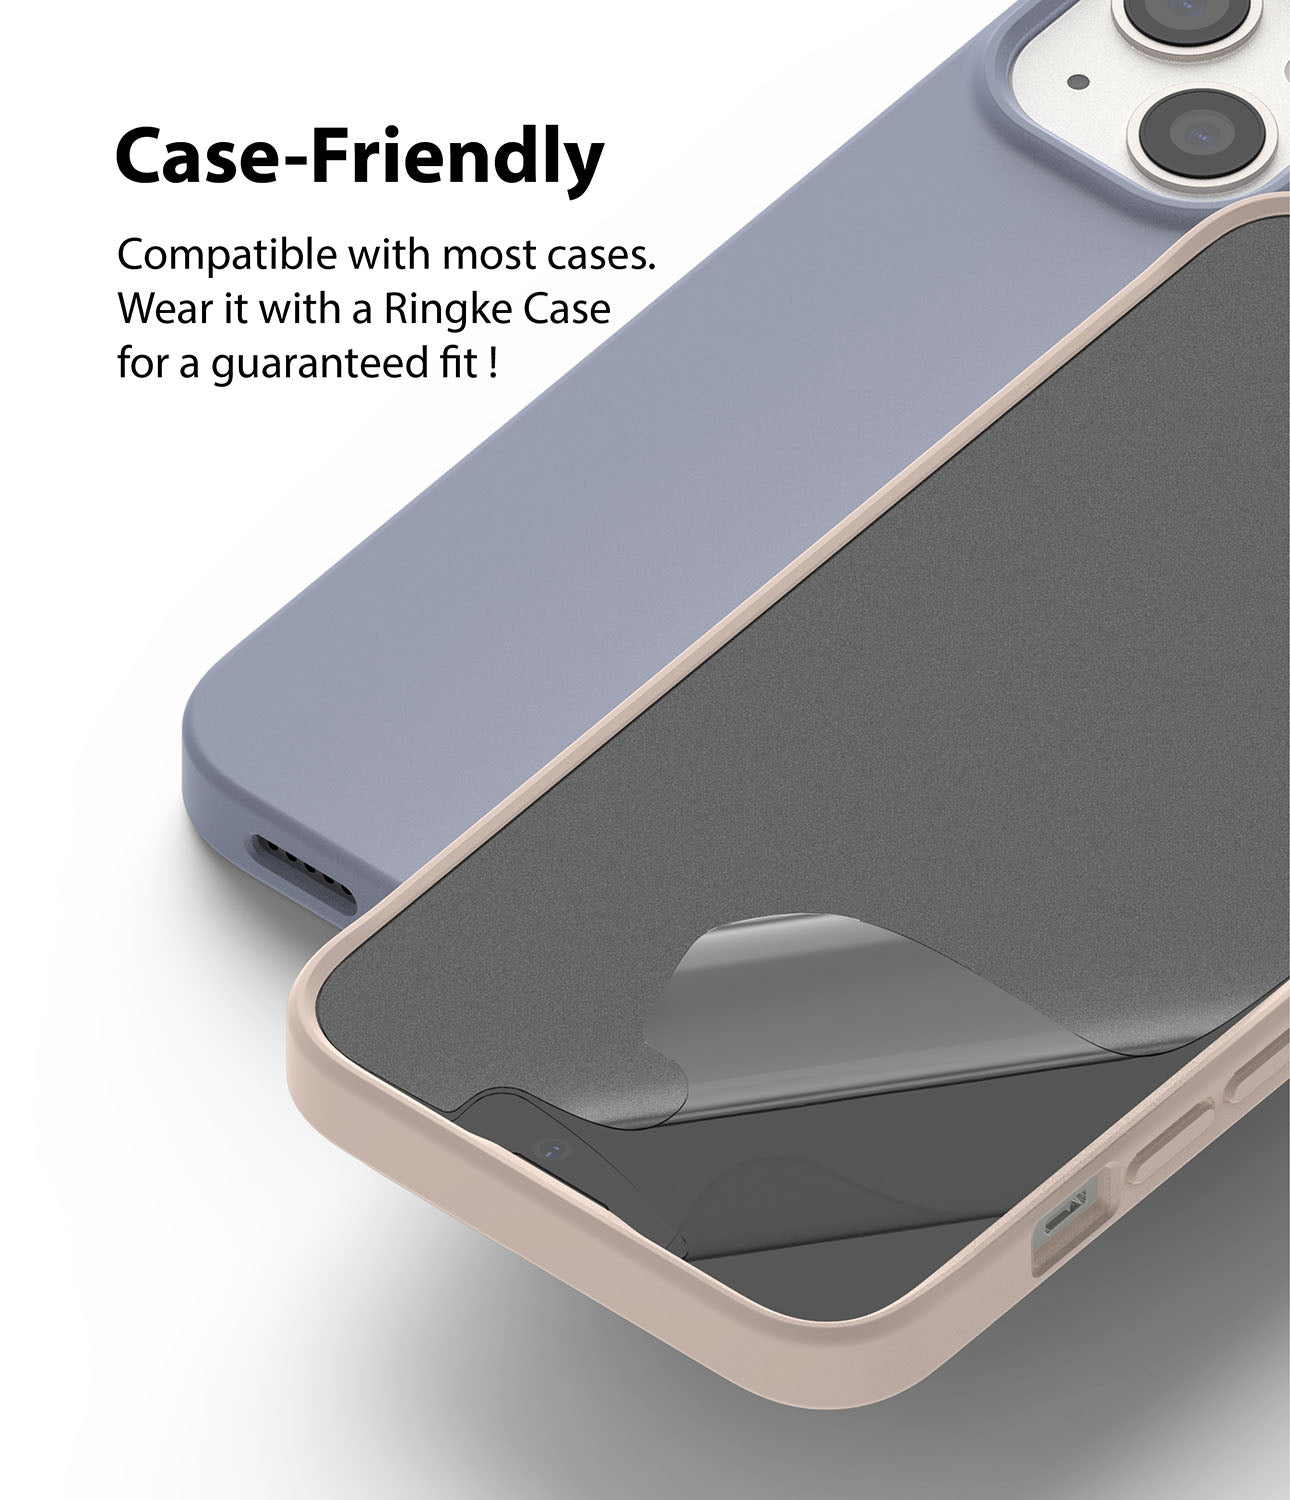 iPhone 13 Mini Screen Protector | Dual Easy Film Matte - Case Friendly. Compatible with most cases. Wear it with a Ringke Case for a guaranteed fit.